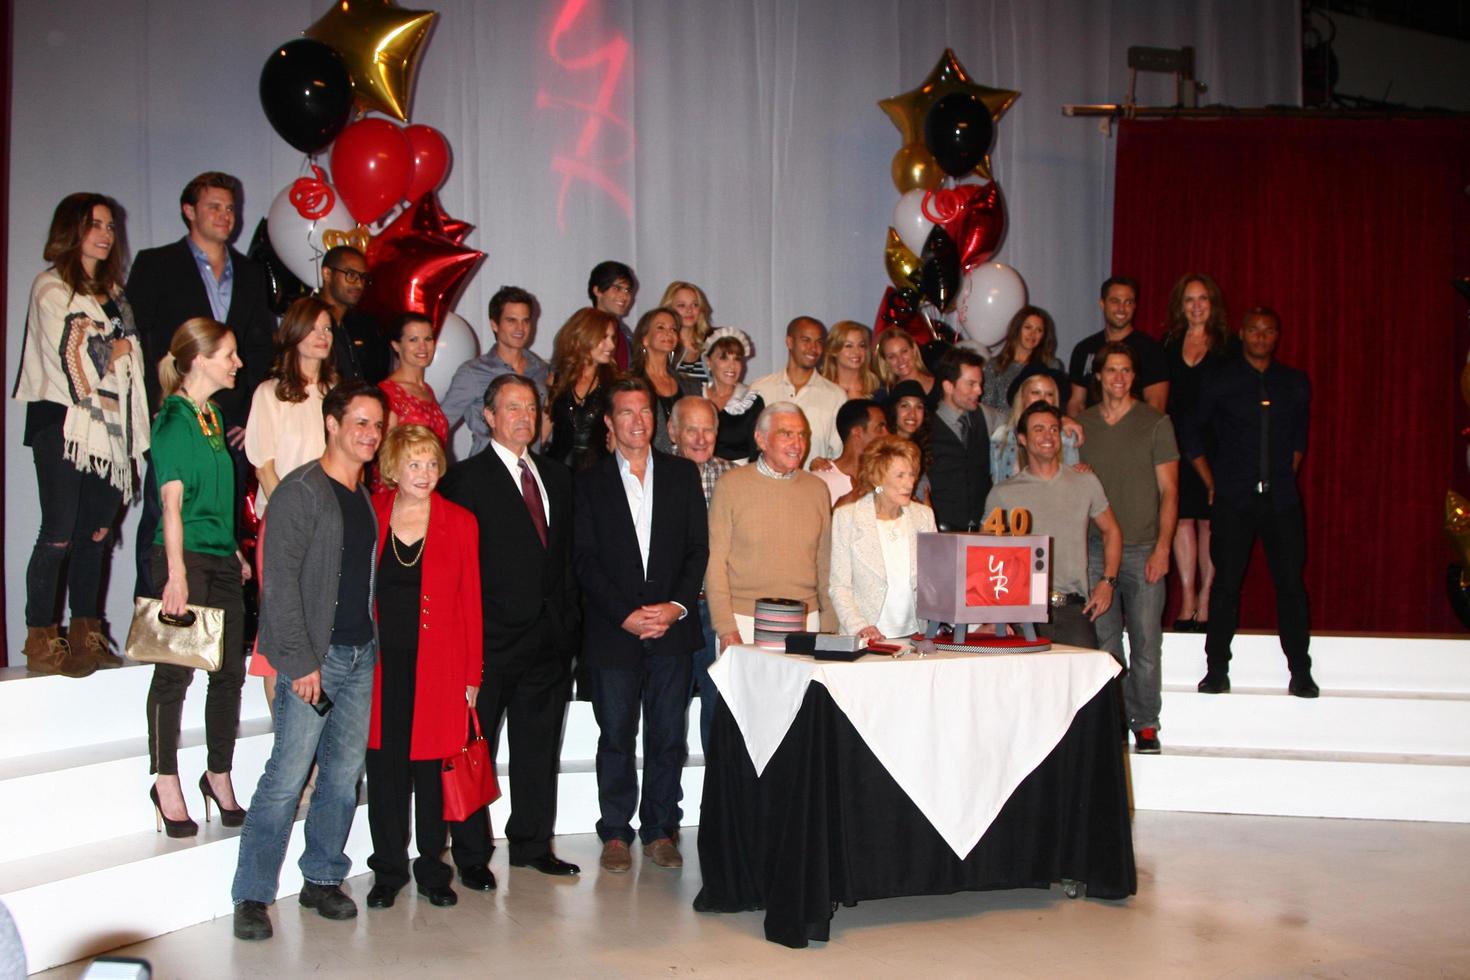 LOS ANGELES, MAR 26 - Cast of the Young and the Restless attends the 40th Anniversary of the Young and the Restless Celebration at the CBS Television City on March 26, 2013 in Los Angeles, CA photo